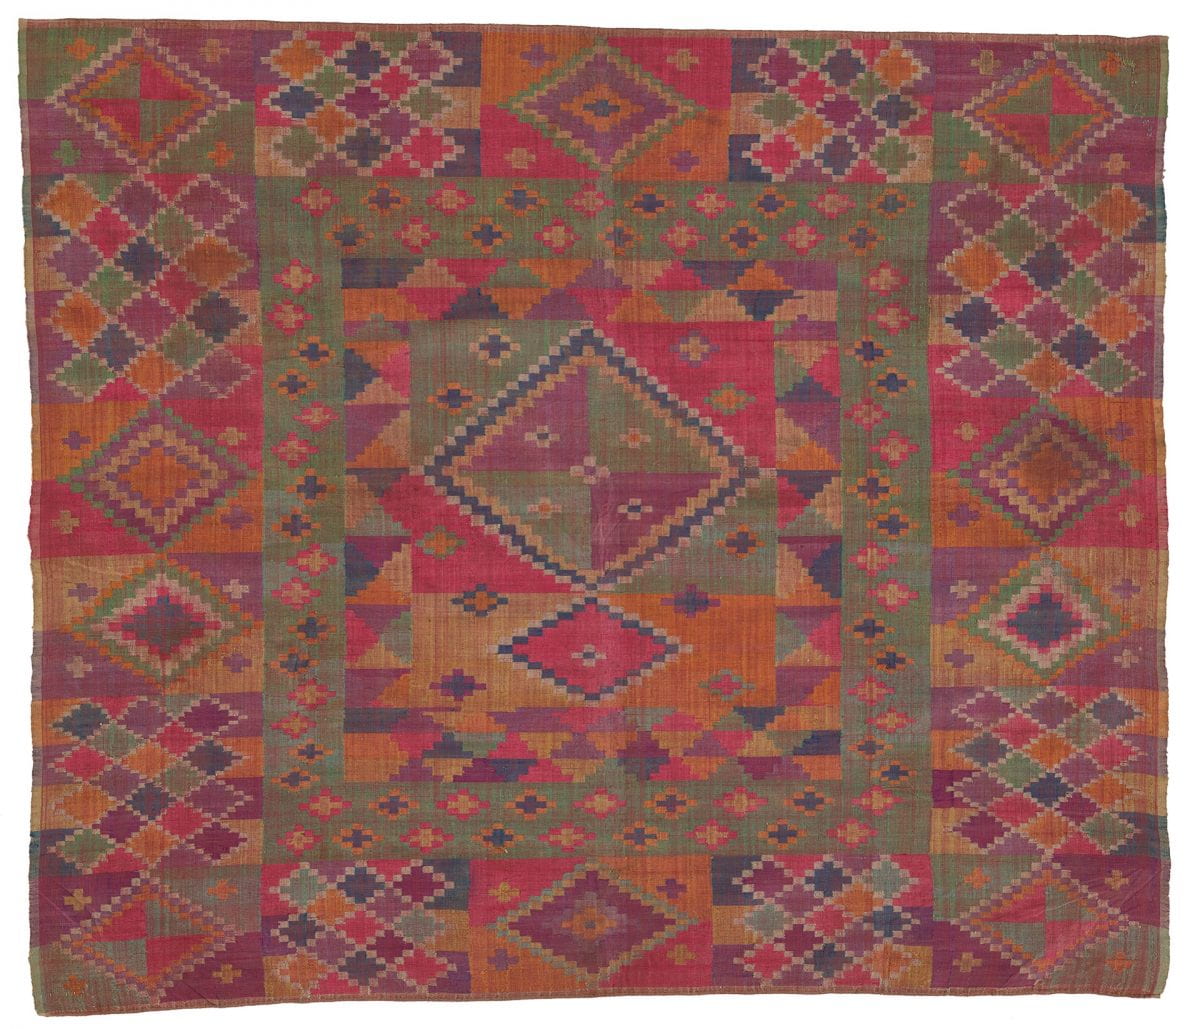 Rectangular cloth with concentric framing schemes showing diamond patterns